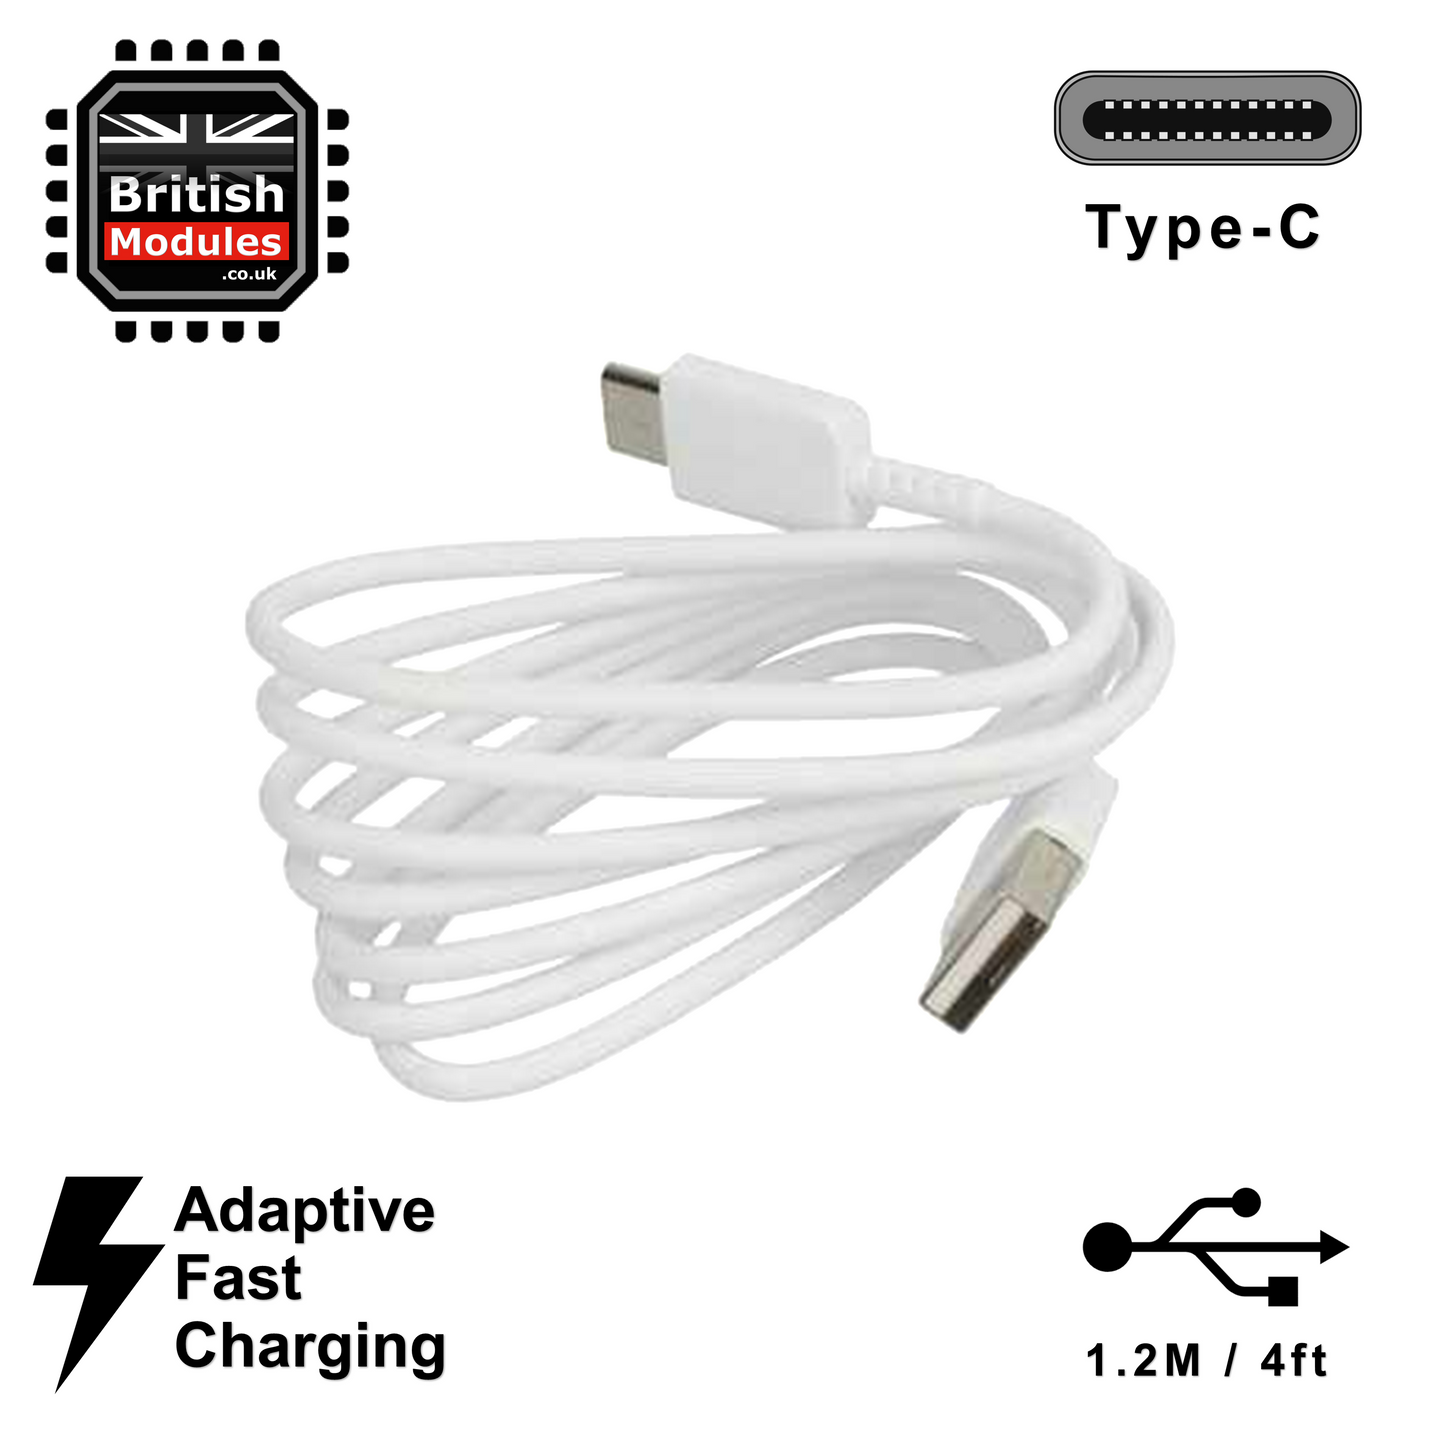 Samsung Galaxy 15W Adaptive Fast Charging Plug and USB Type C Cable